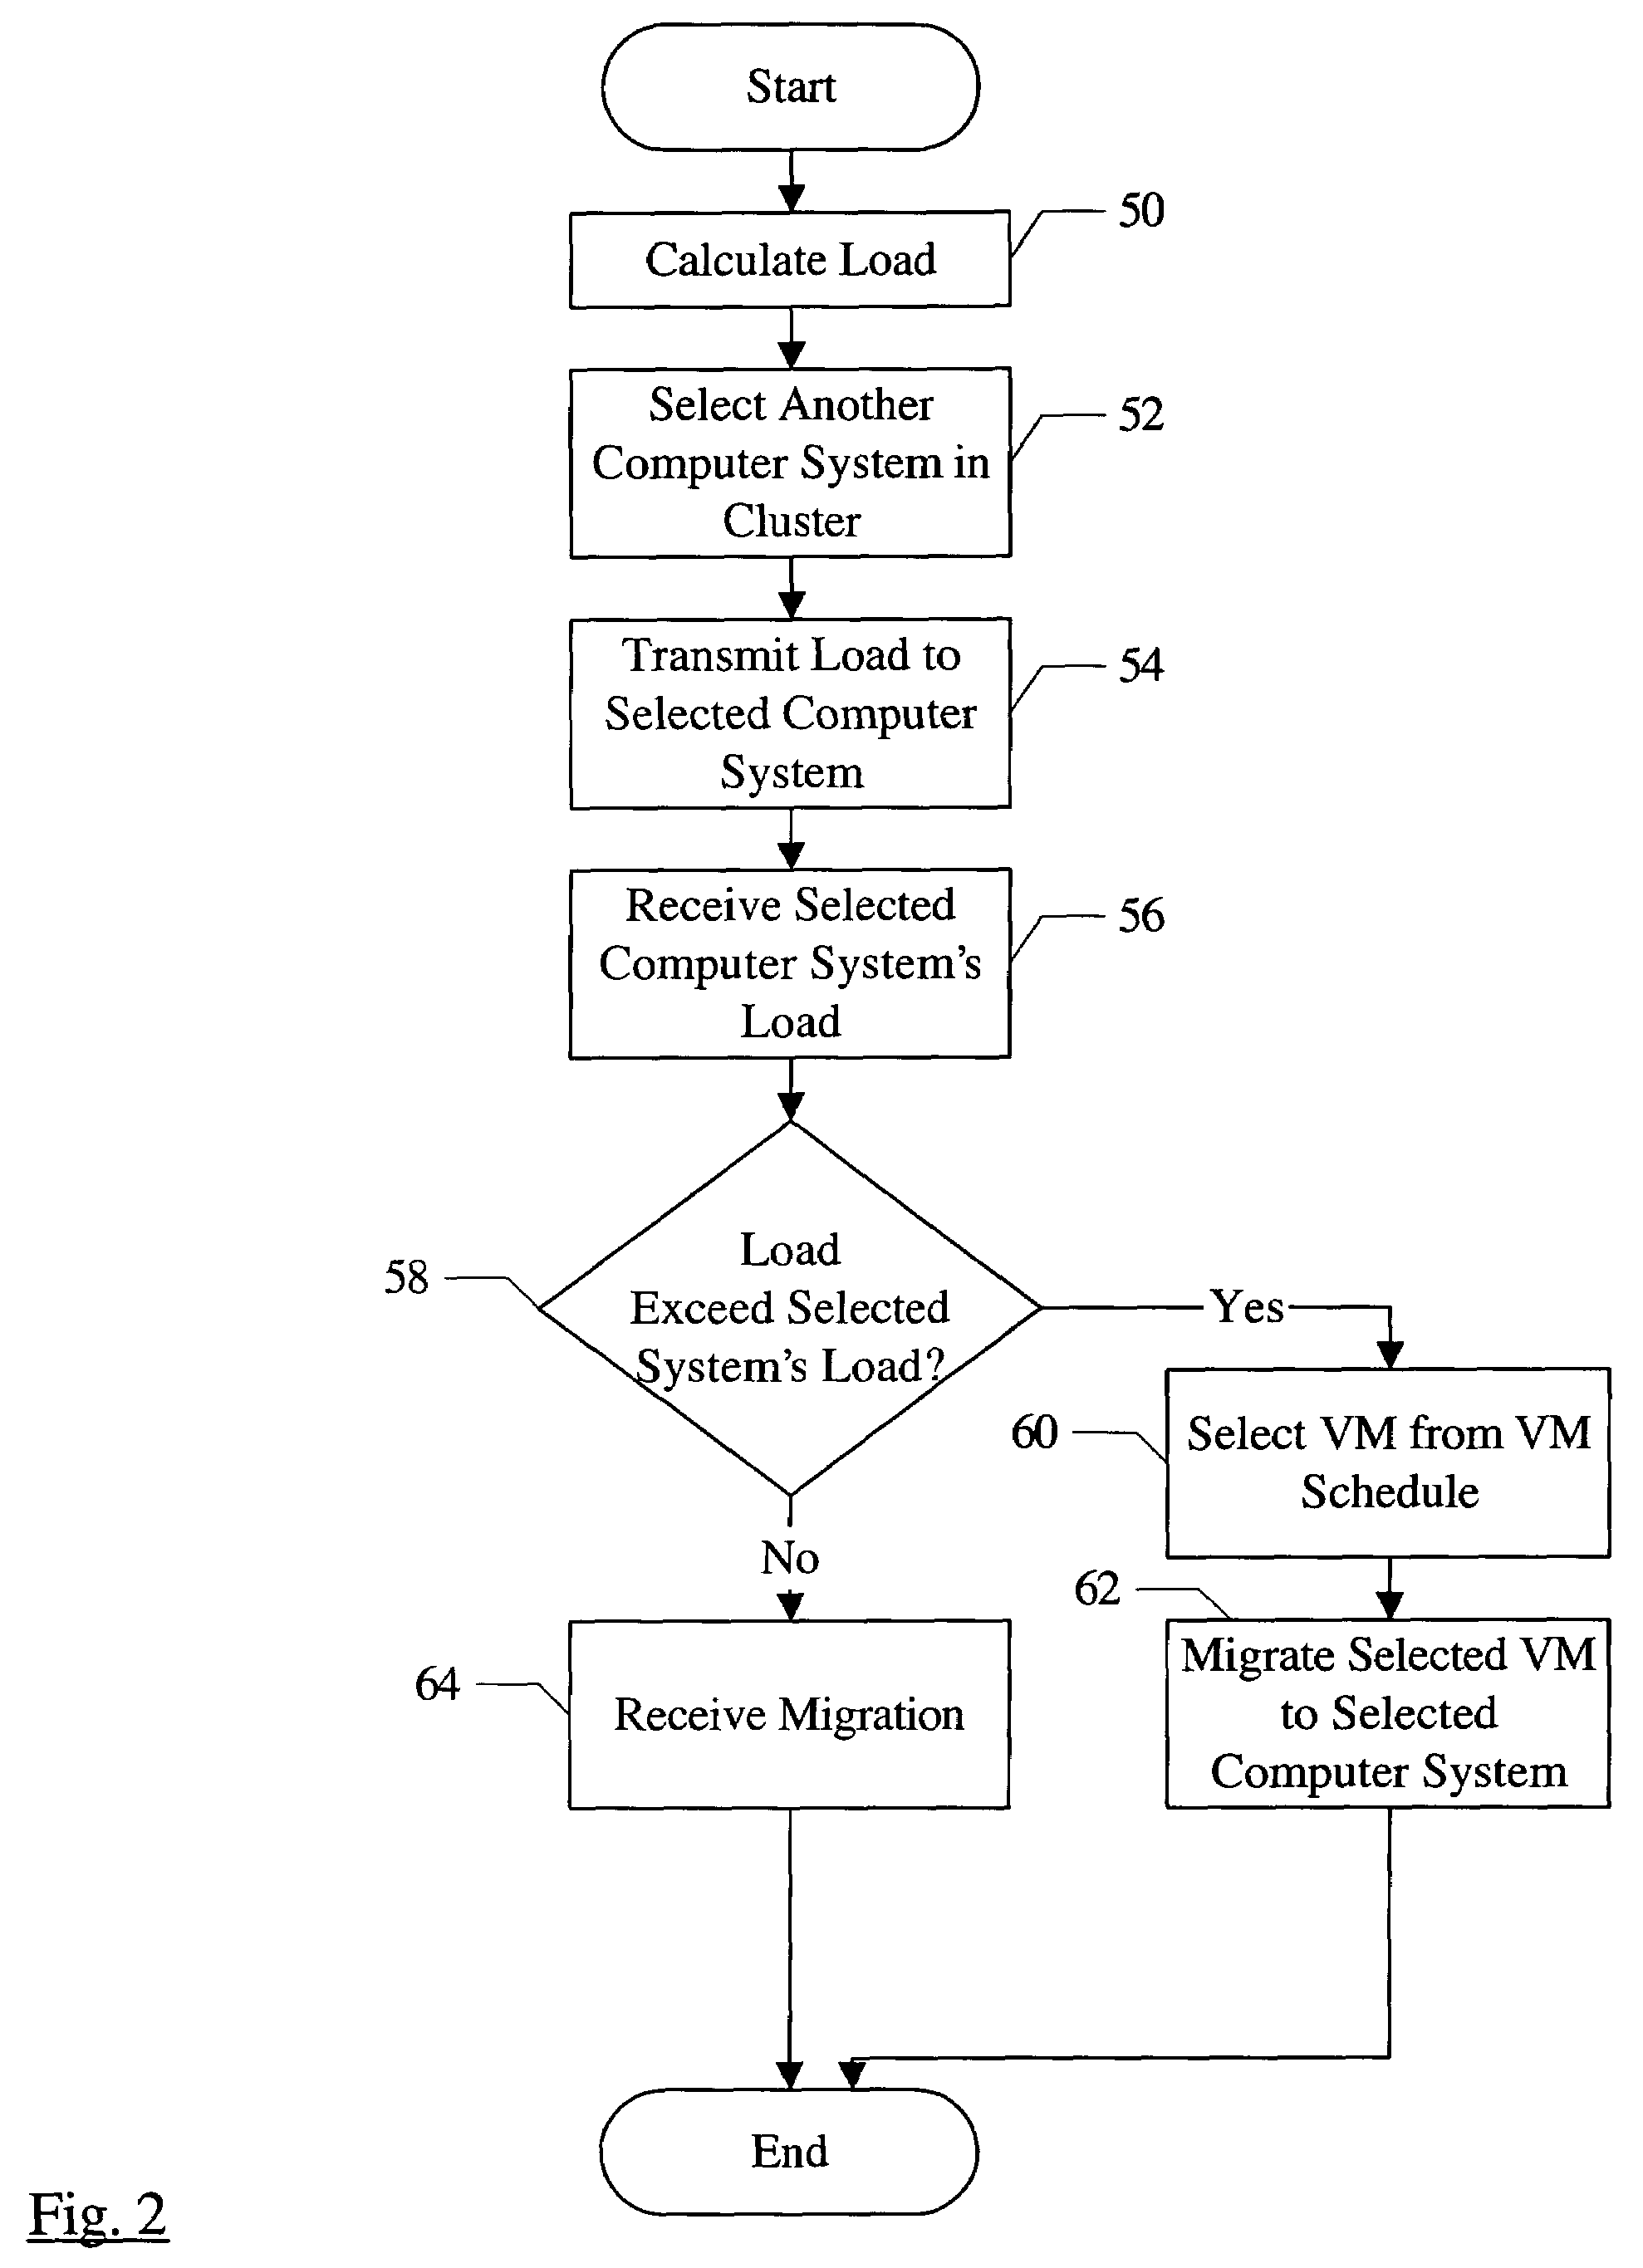 Migrating virtual machines among computer systems to balance load caused by virtual machines